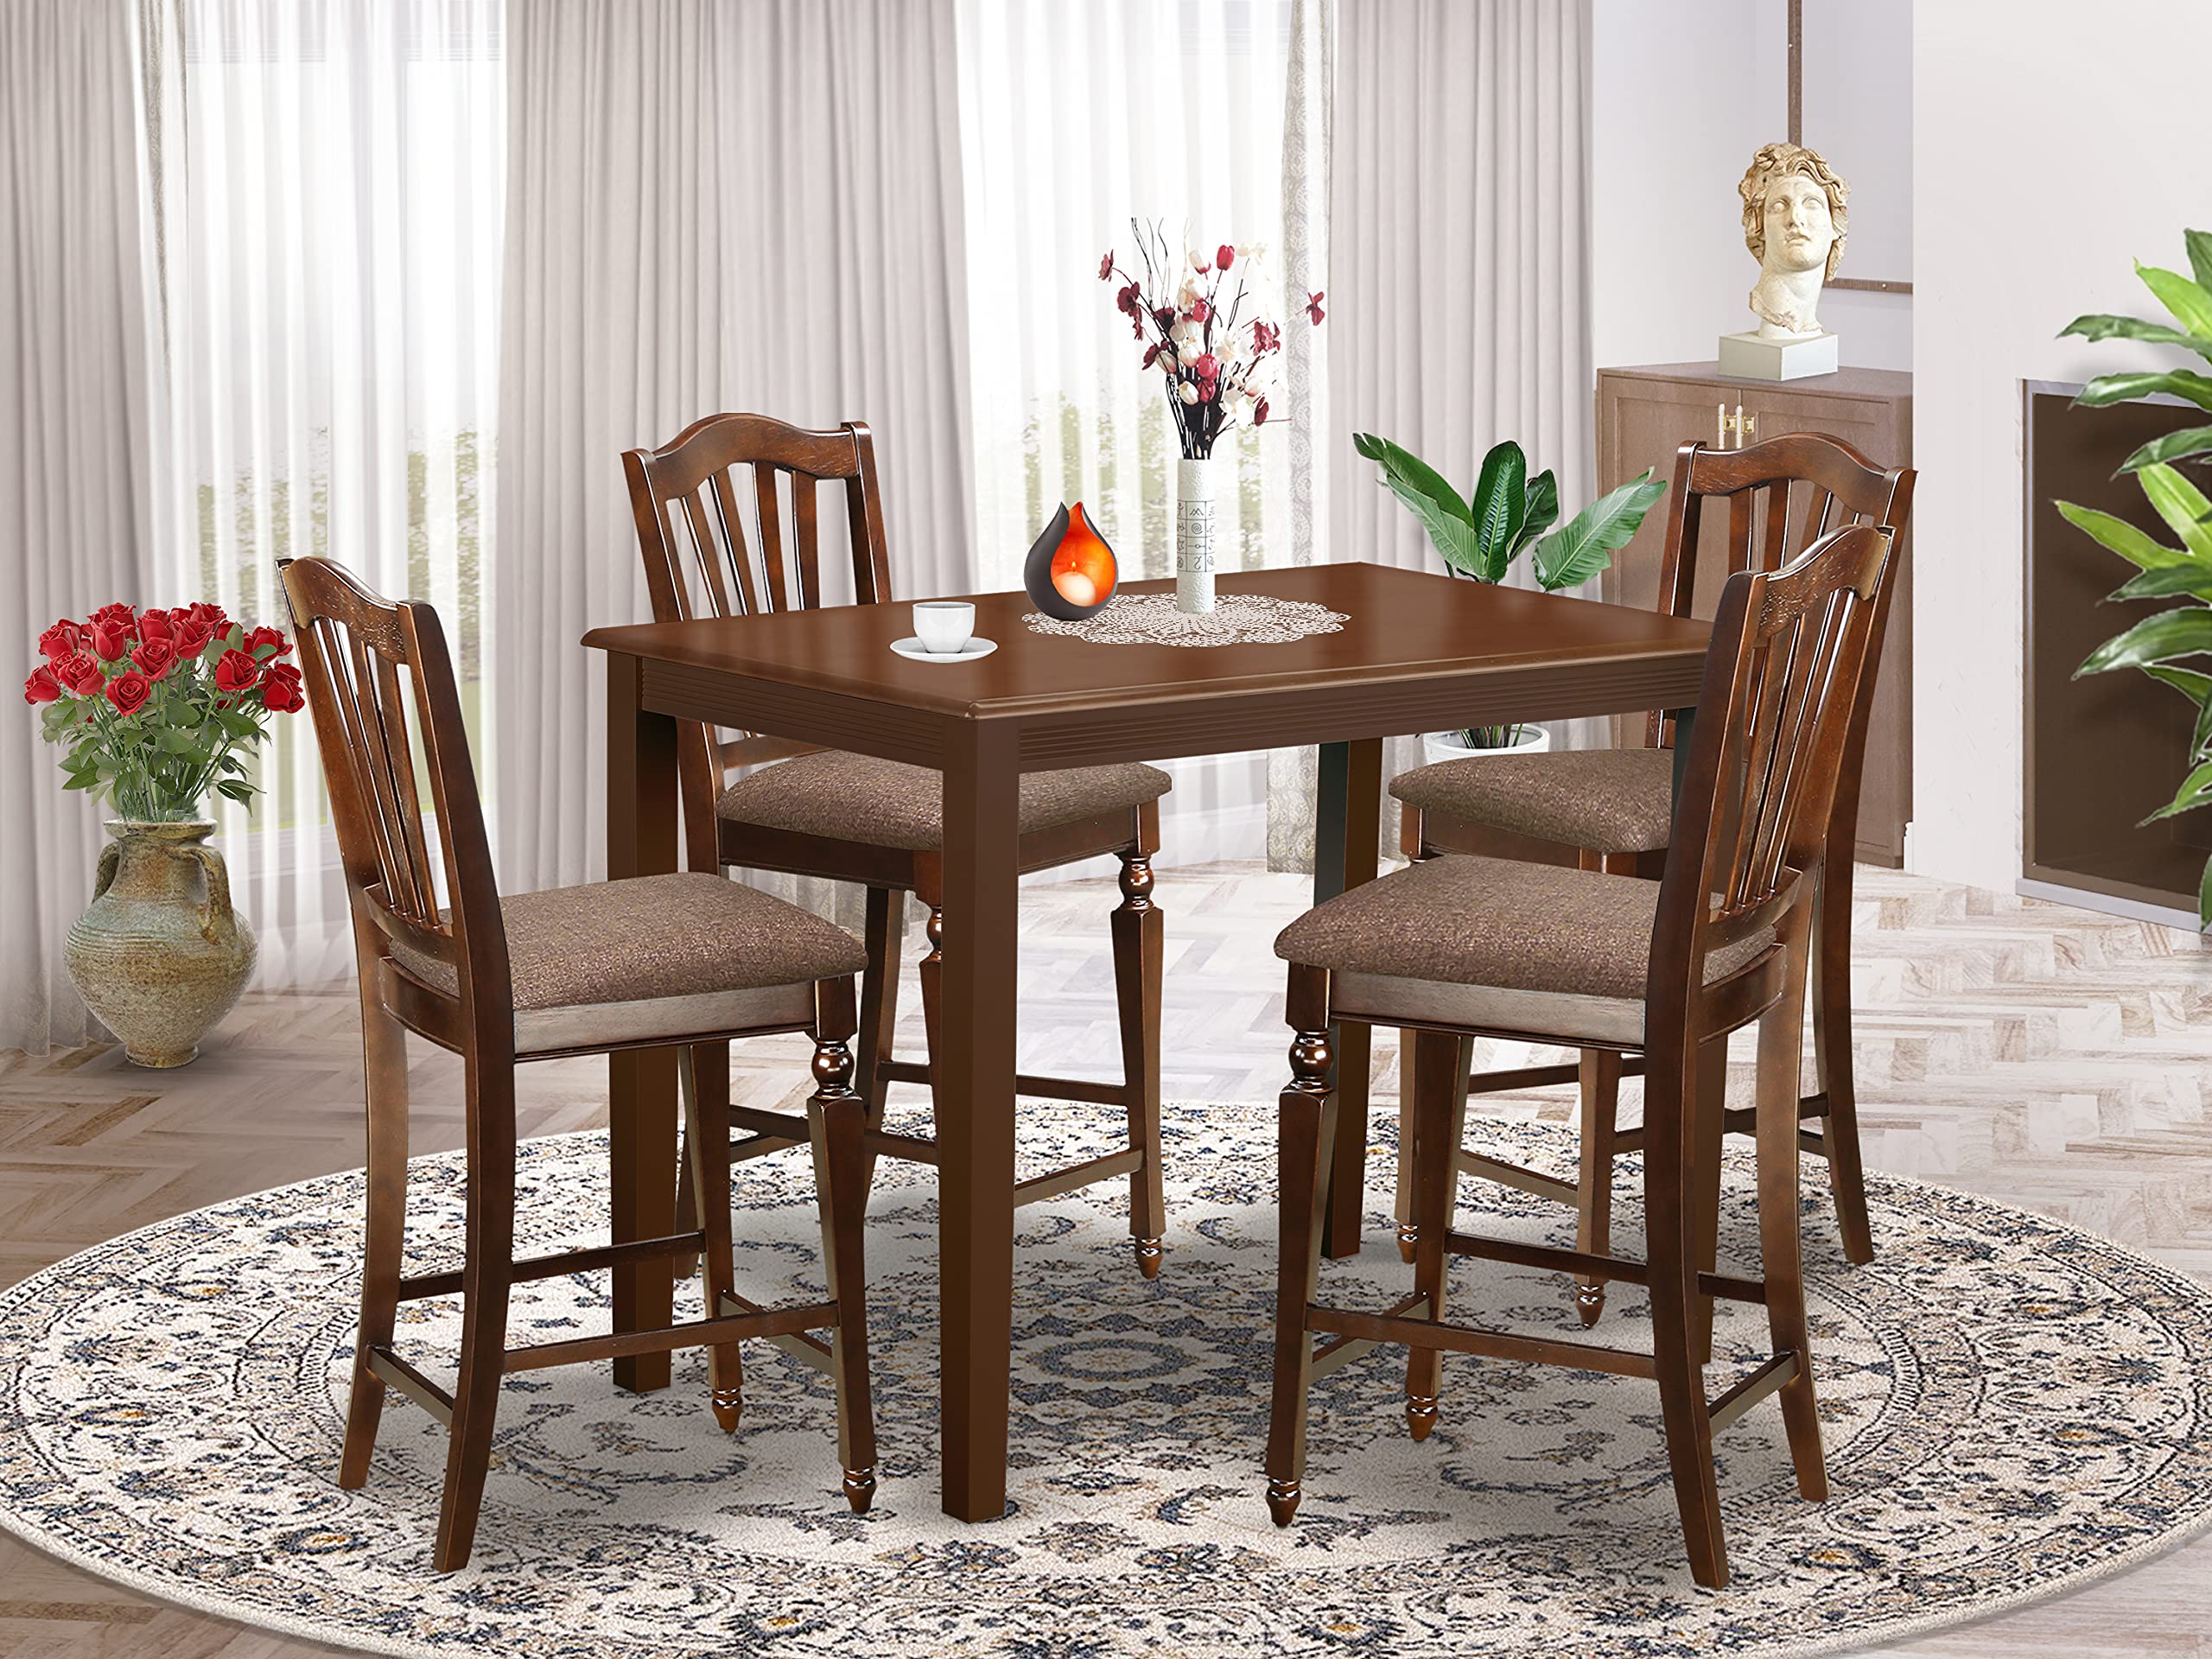 East West Furniture YACH5-MAH-C 5 Pc counter height Dining set - high Table and 4 counter height Dining chair.